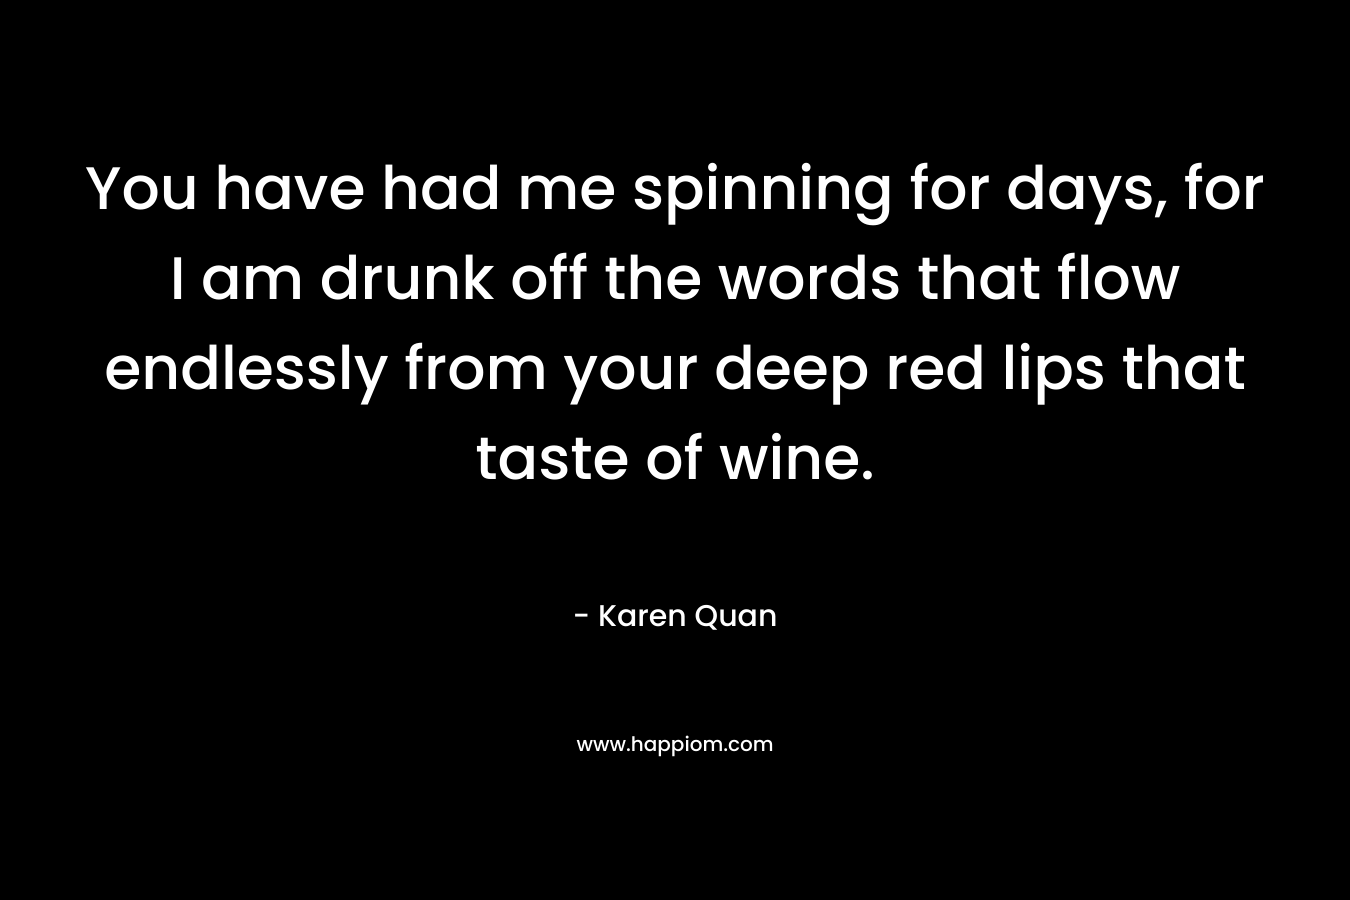 You have had me spinning for days, for I am drunk off the words that flow endlessly from your deep red lips that taste of wine.